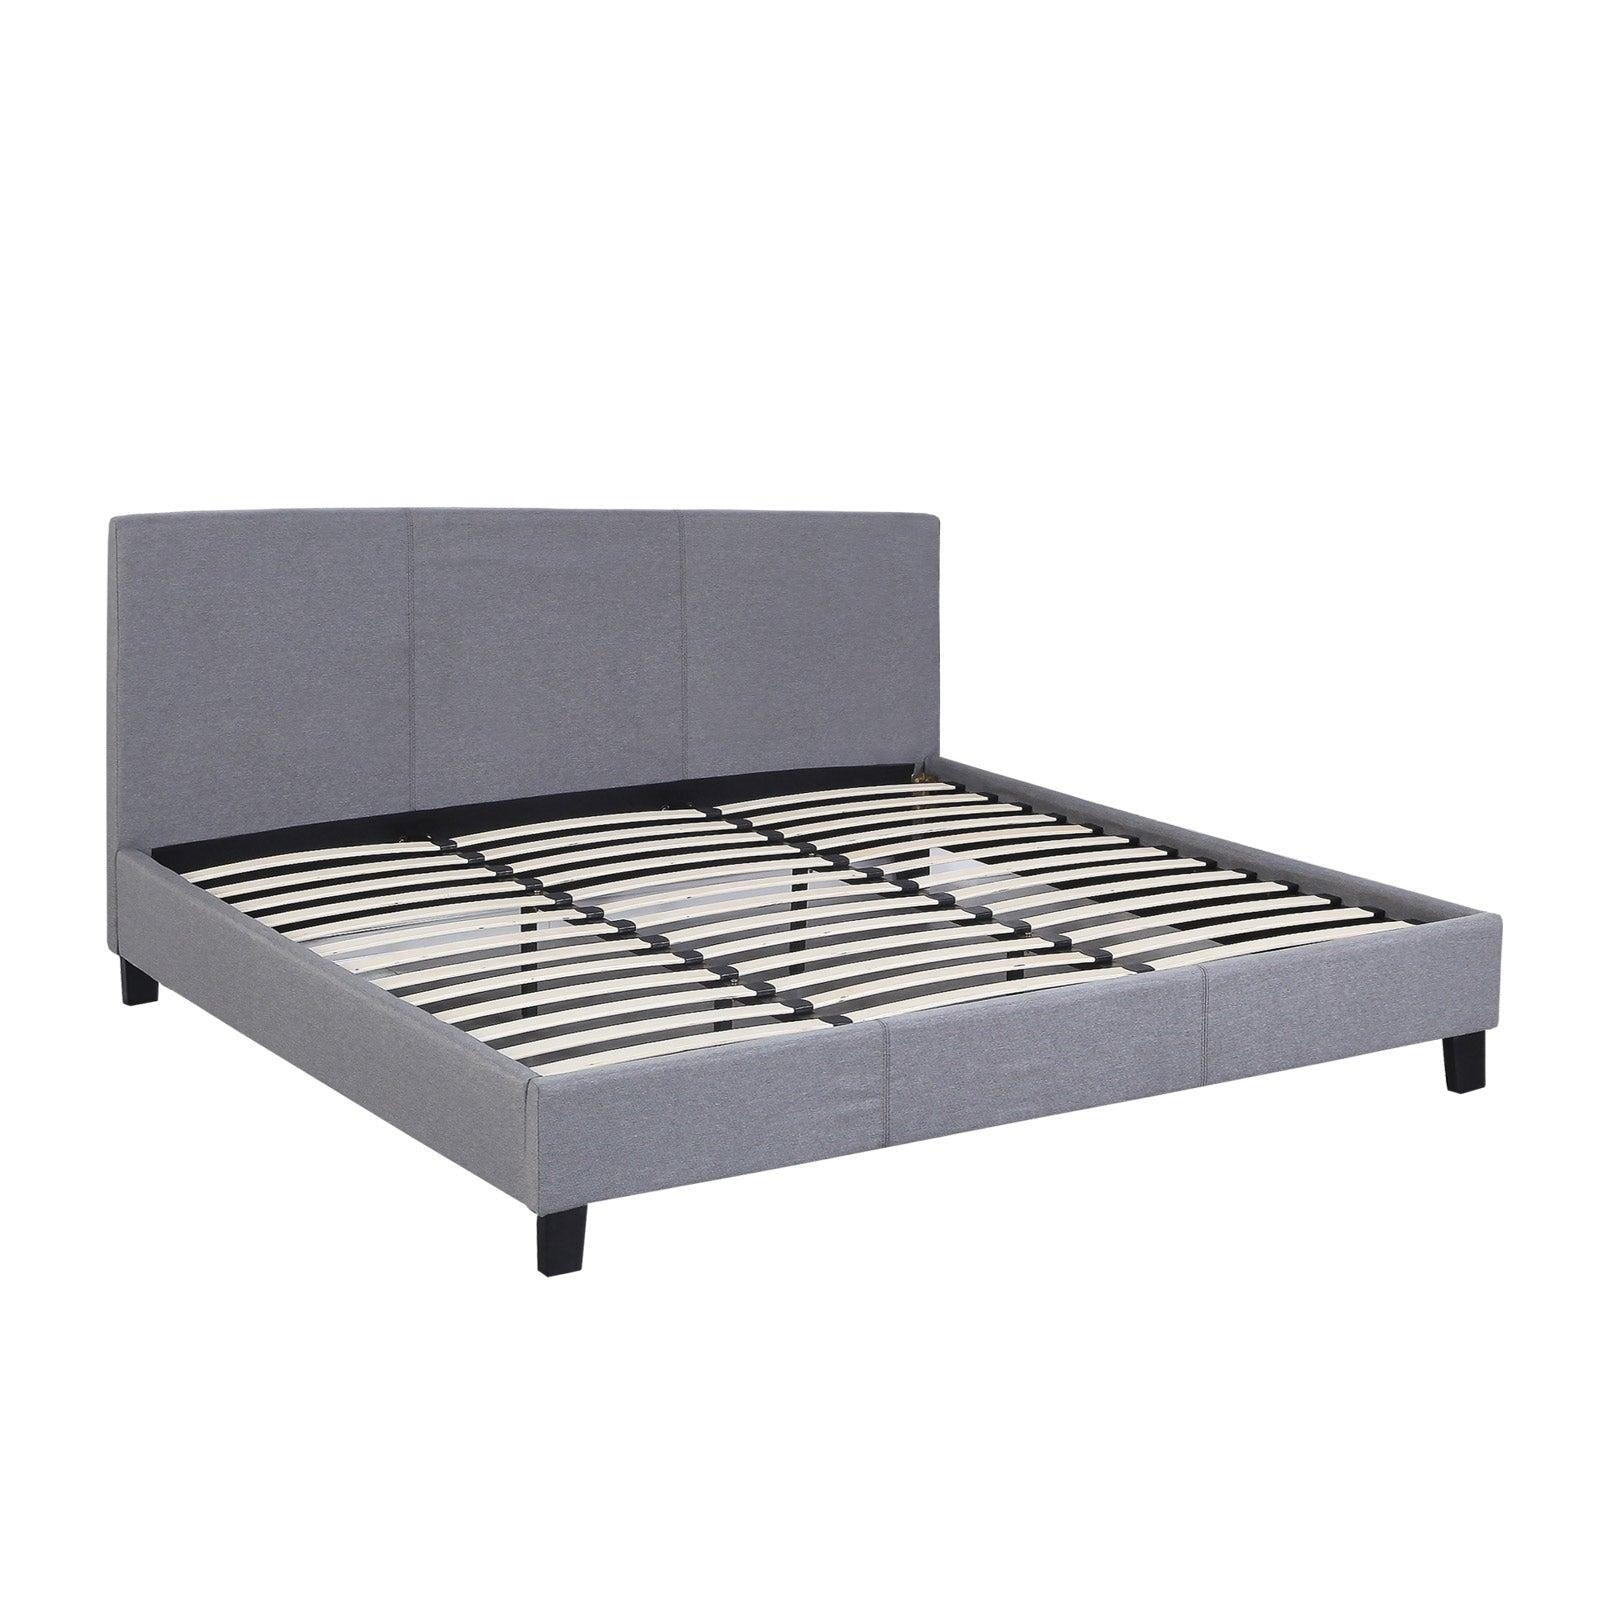 Milano Sienna Luxury Bed Frame Base And Headboard Solid Wood Padded Linen Fabric Grey King Deals499